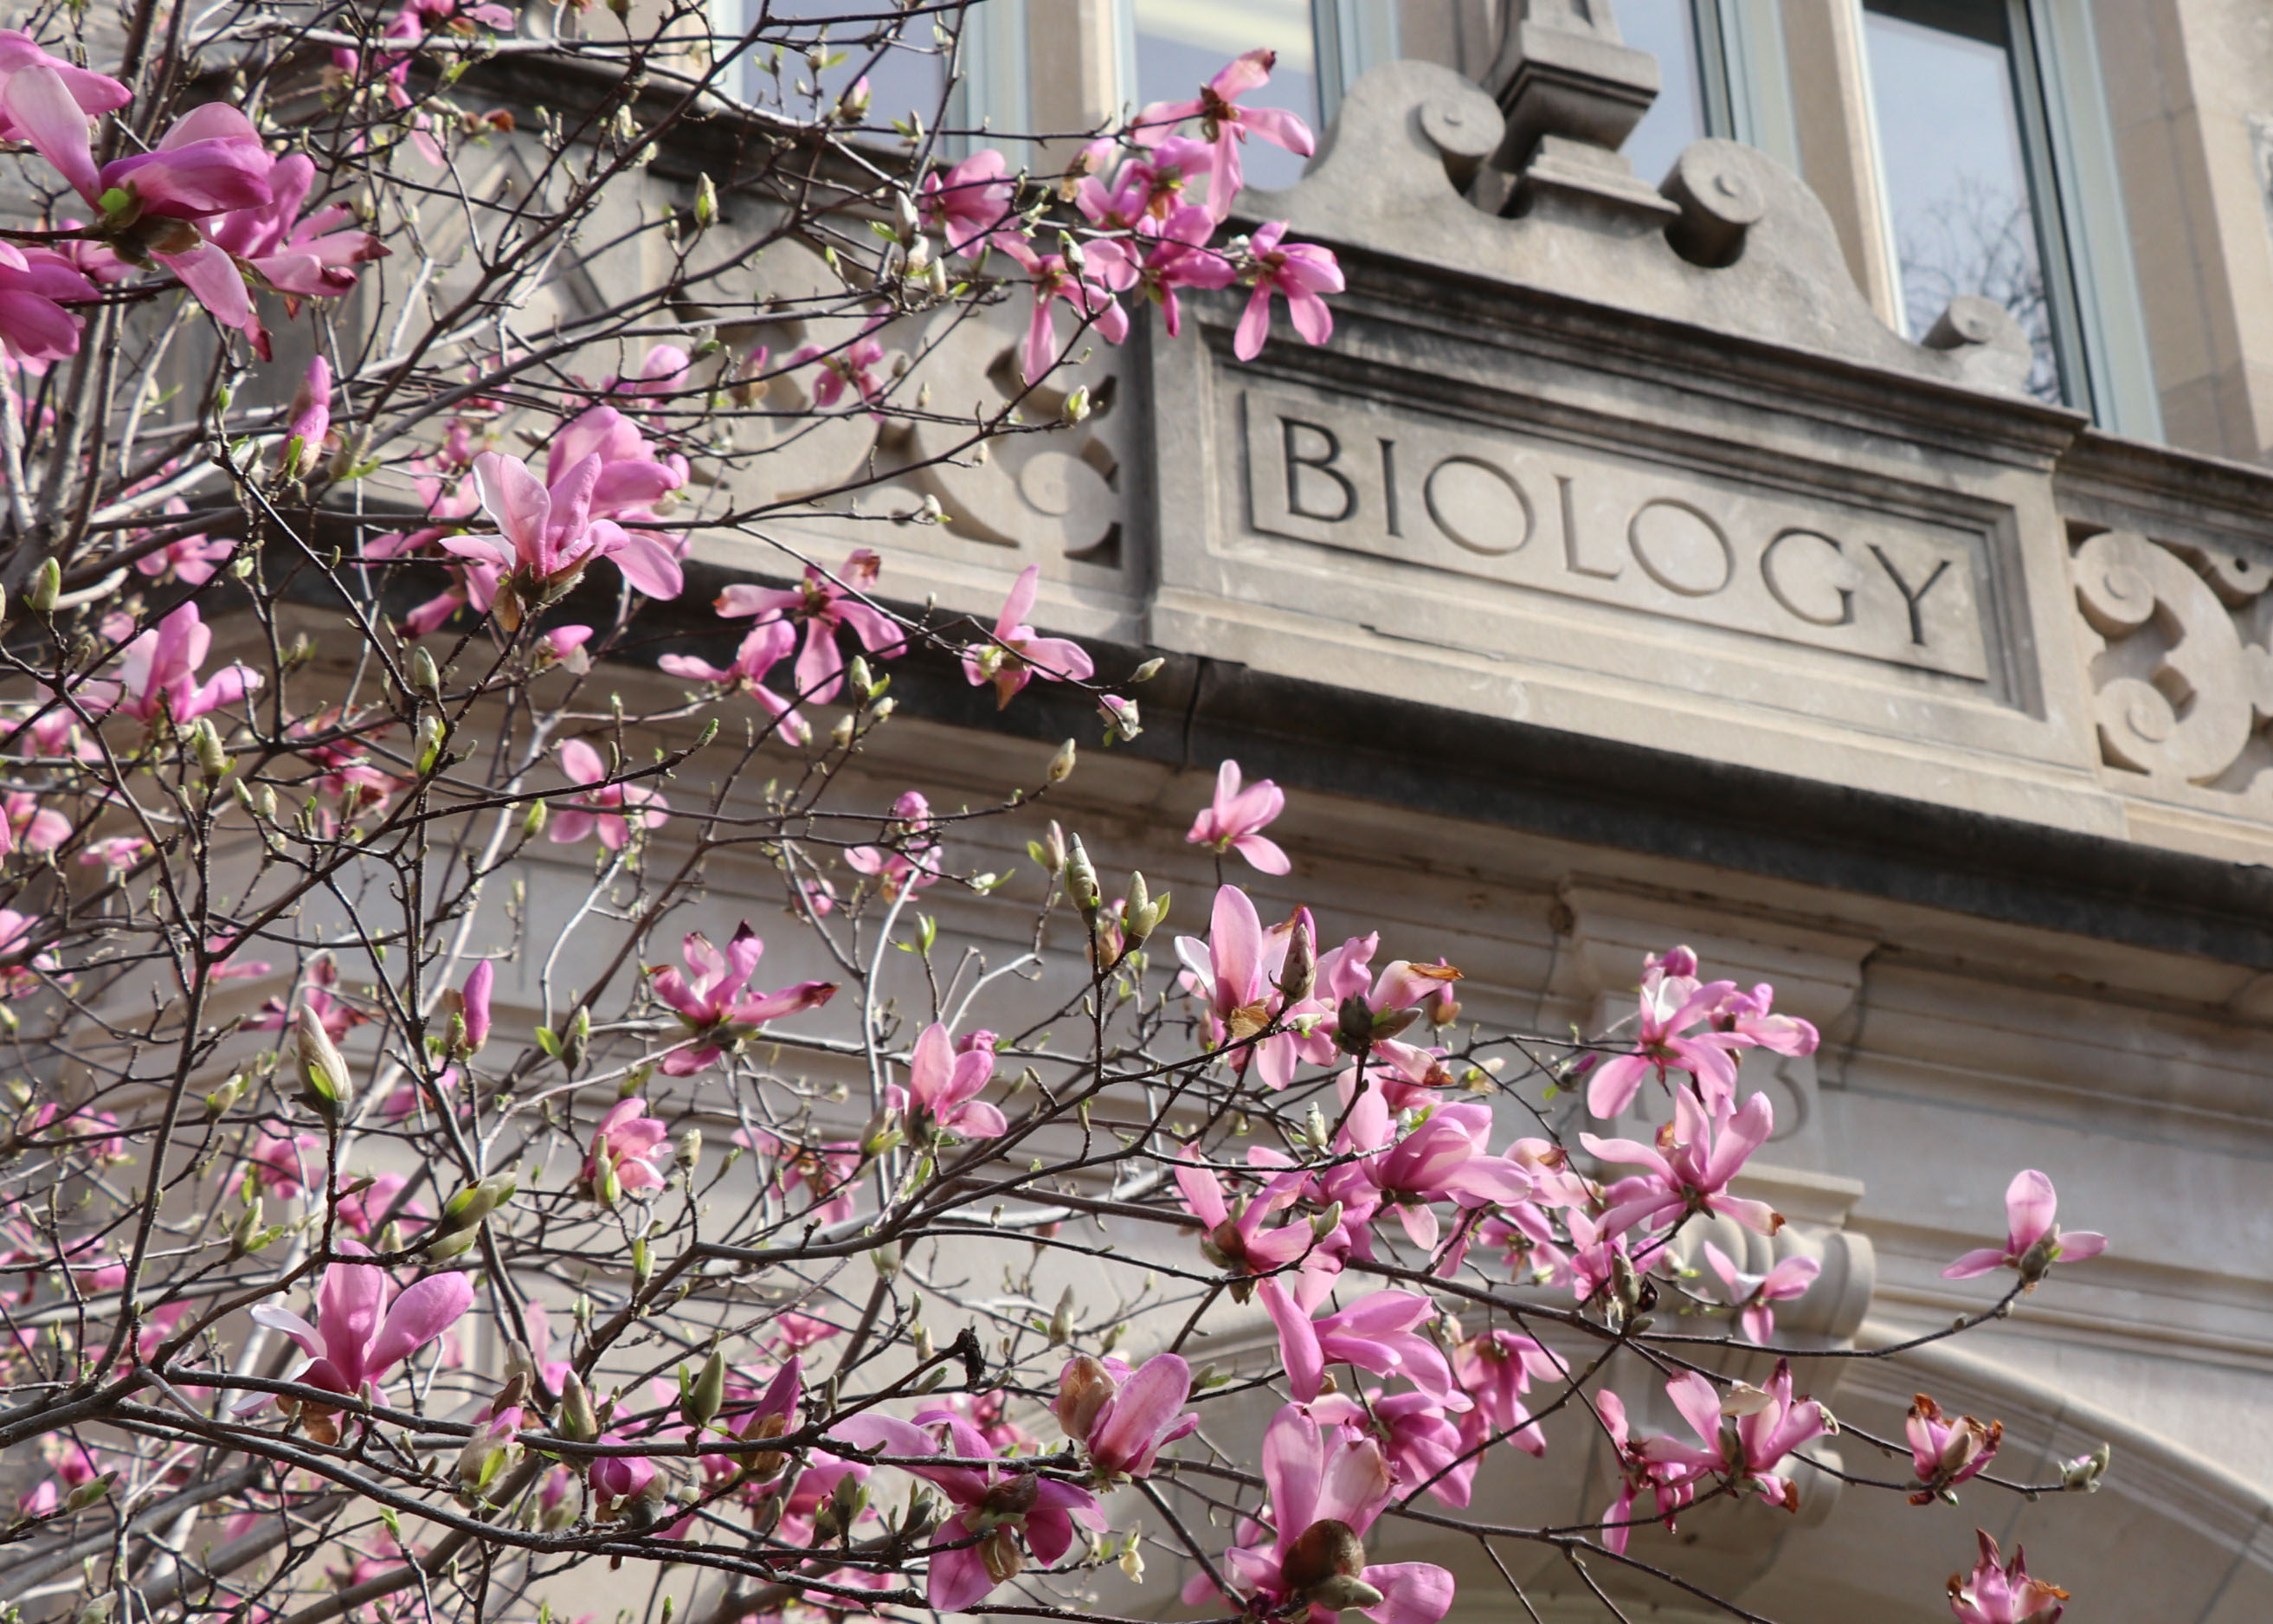 Biology Building with blooms